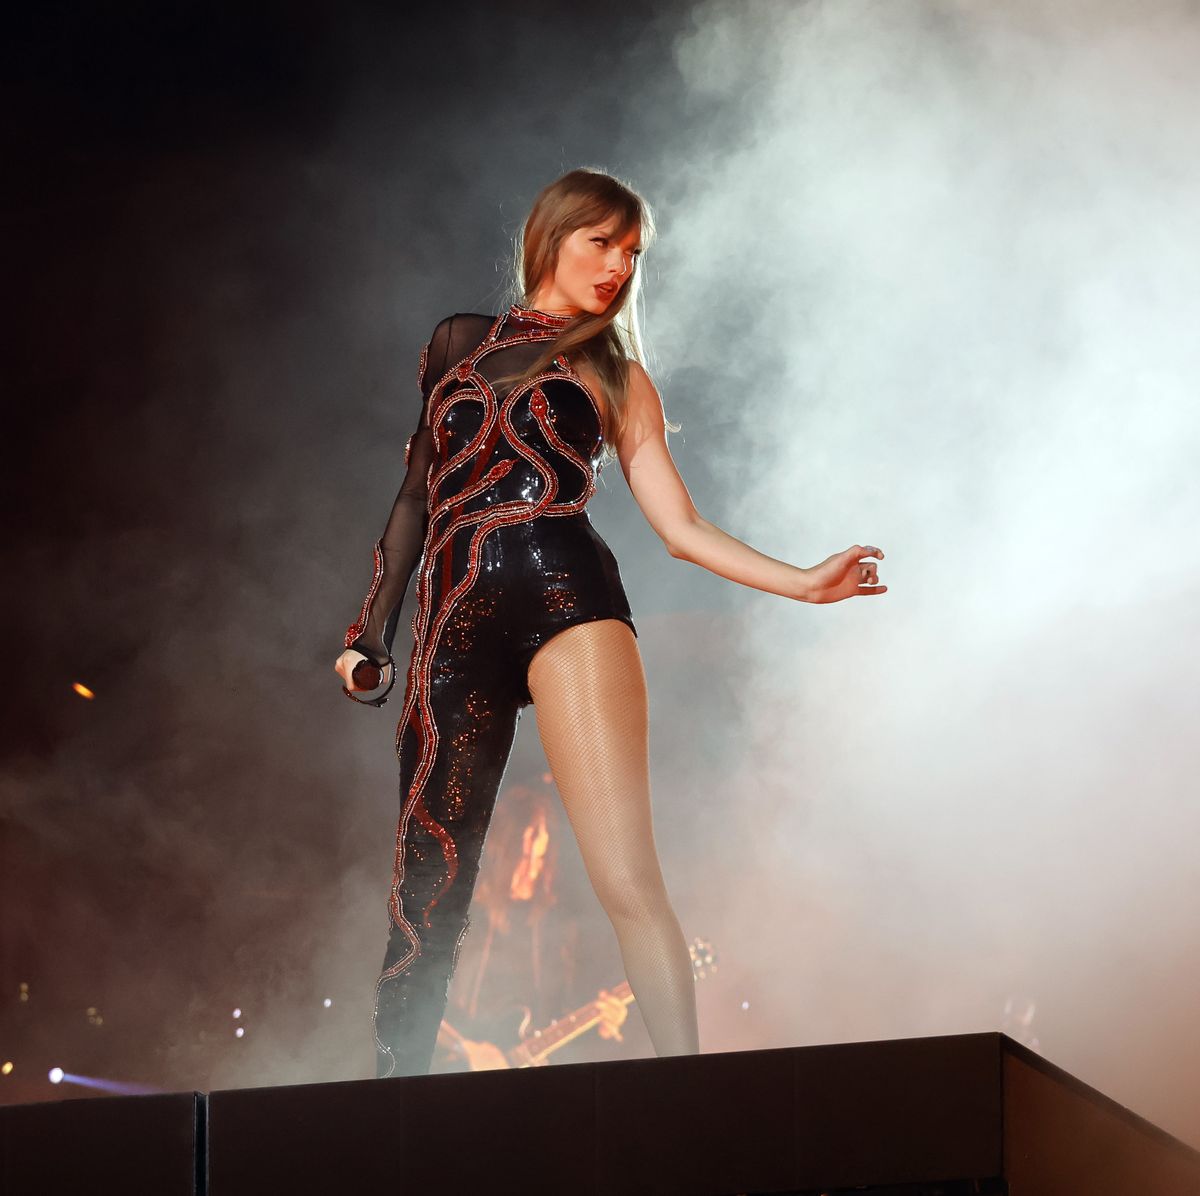 Taylor Swift breaks interview 'trust issues' with Time Magazine